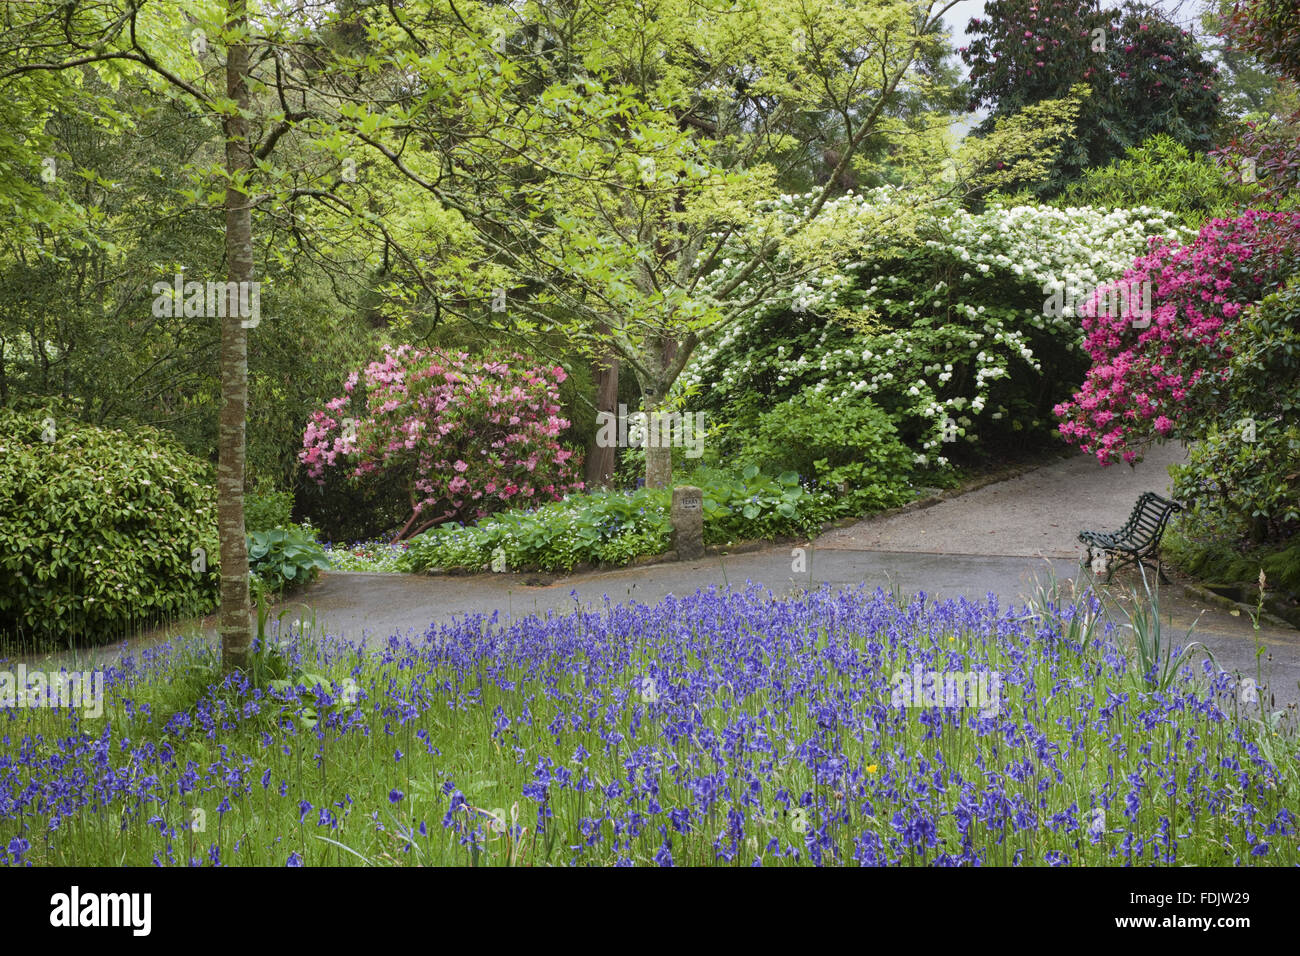 Rhododendrons, azaleas and bluebells in flower at Trelissick Garden, Cornwall, in May. Stock Photo